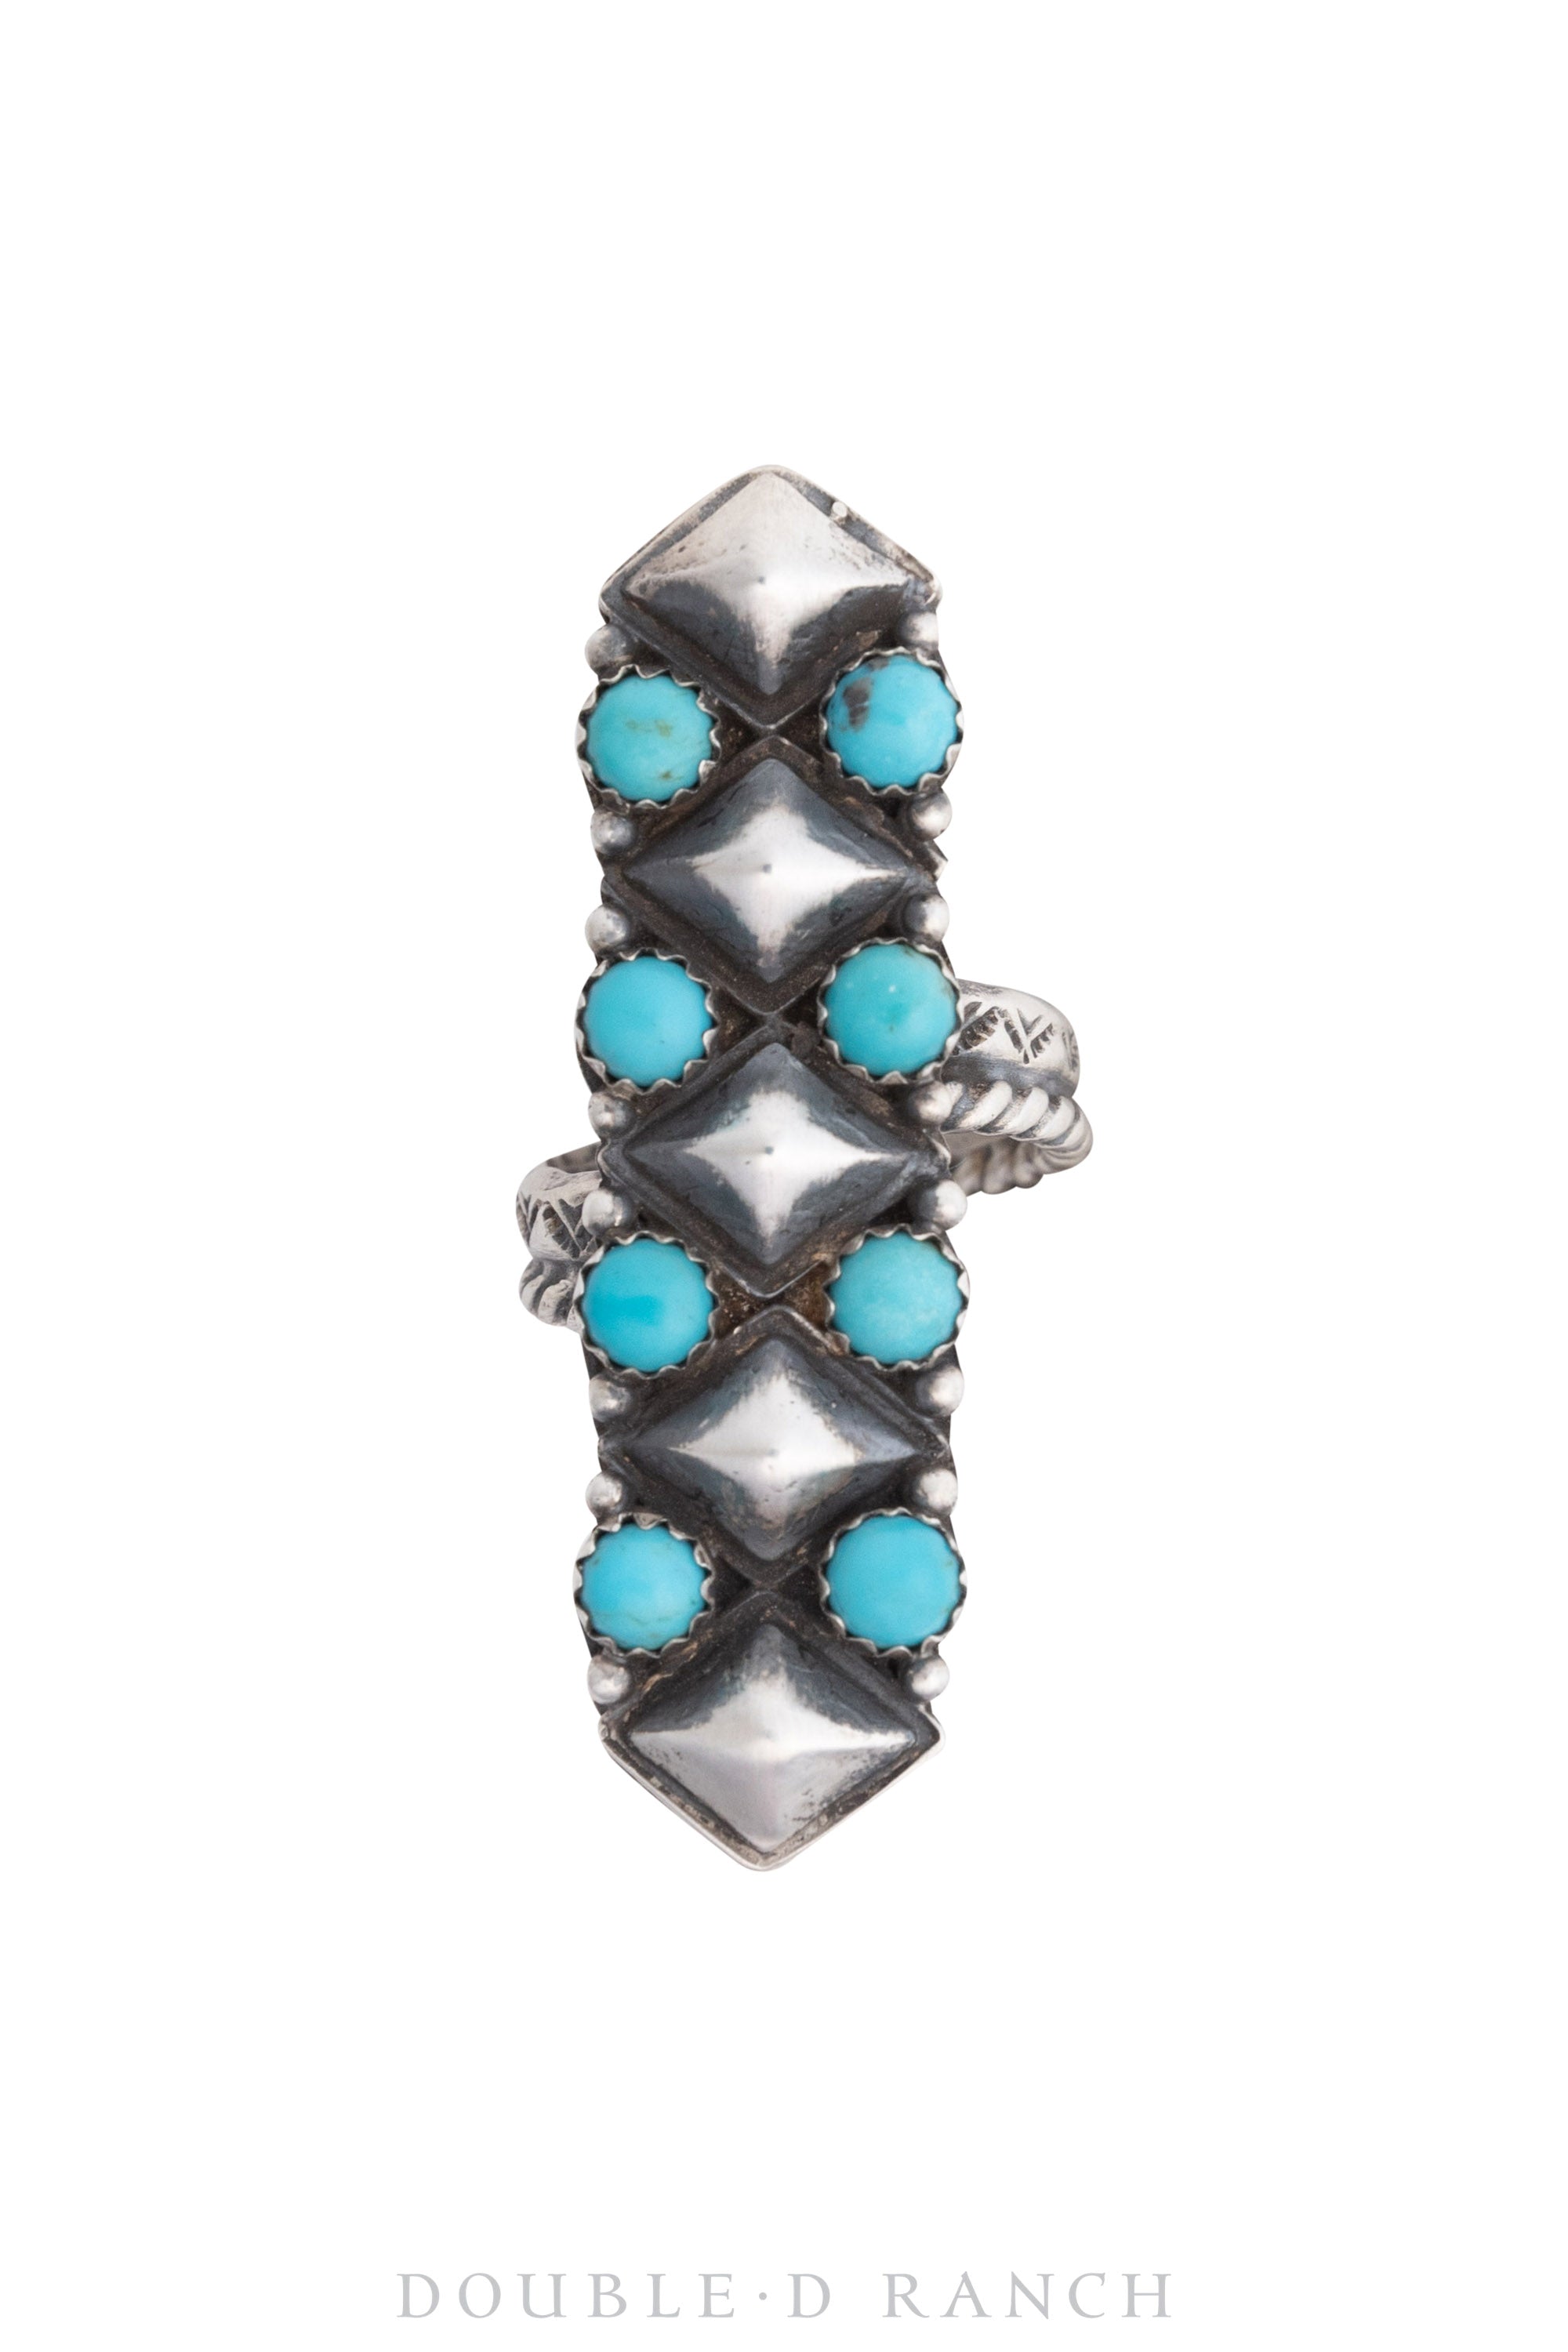 Ring, Cluster, Turquoise, Hallmark, Contemporary, 1220